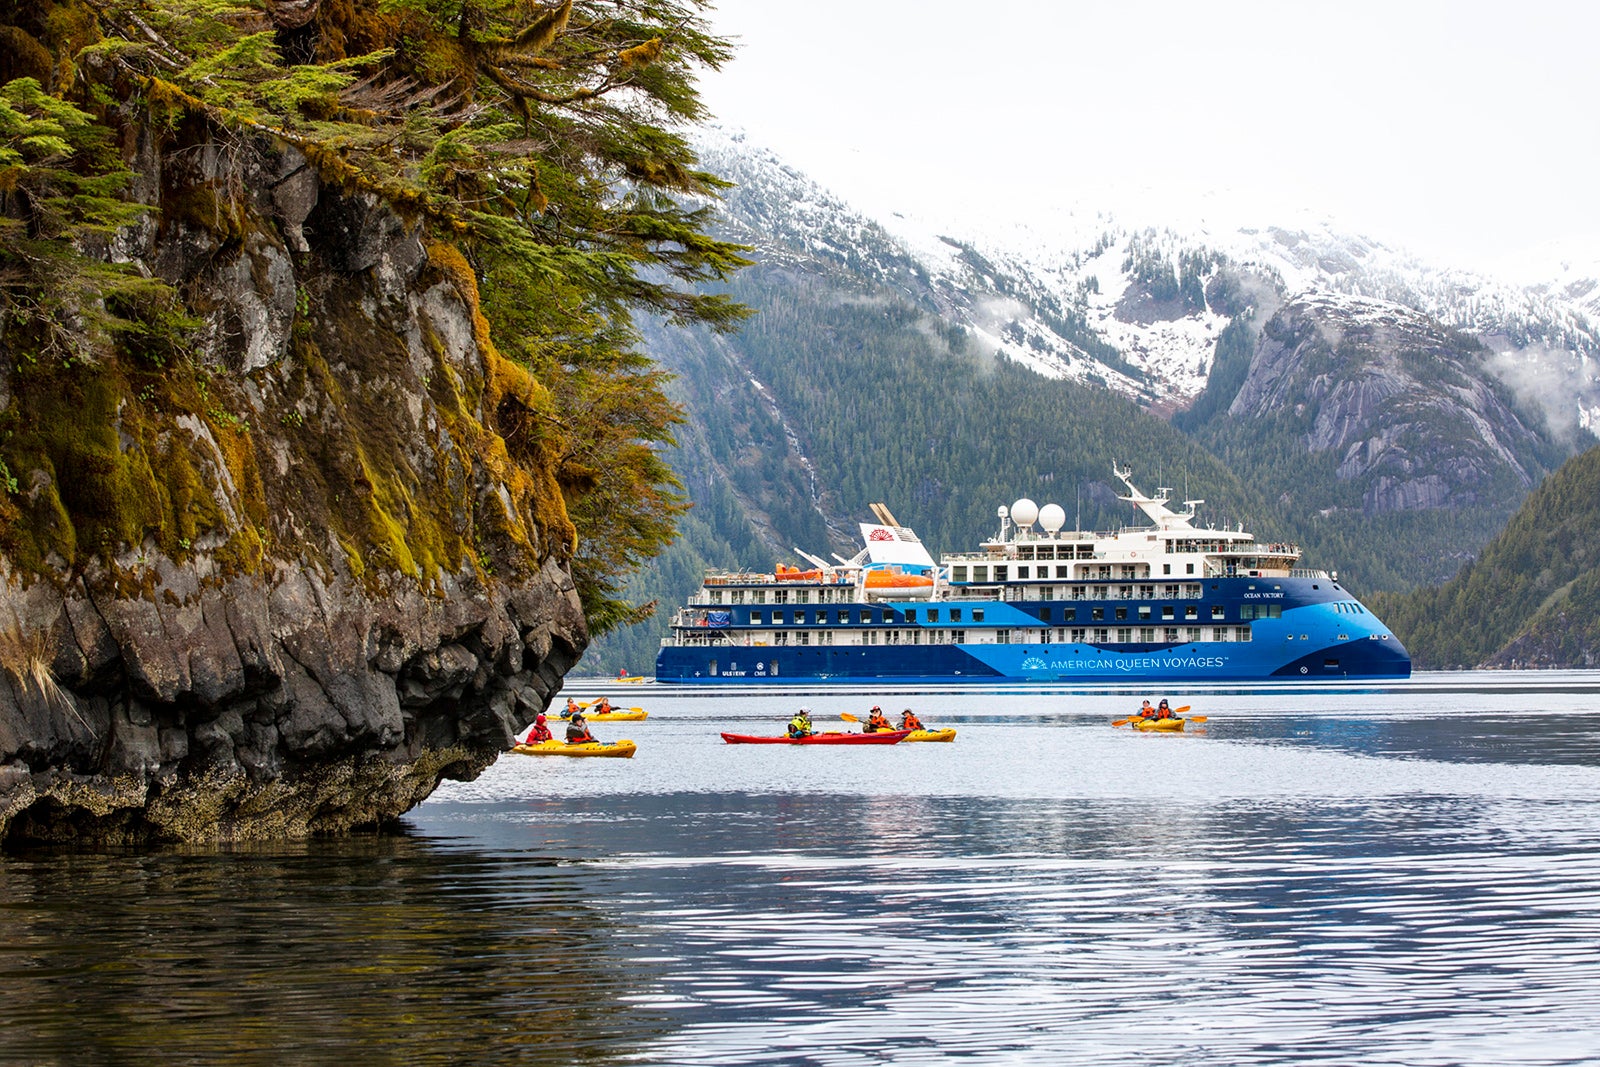 Looking for nature and adventure on an Alaska cruise? Choose a smaller ship